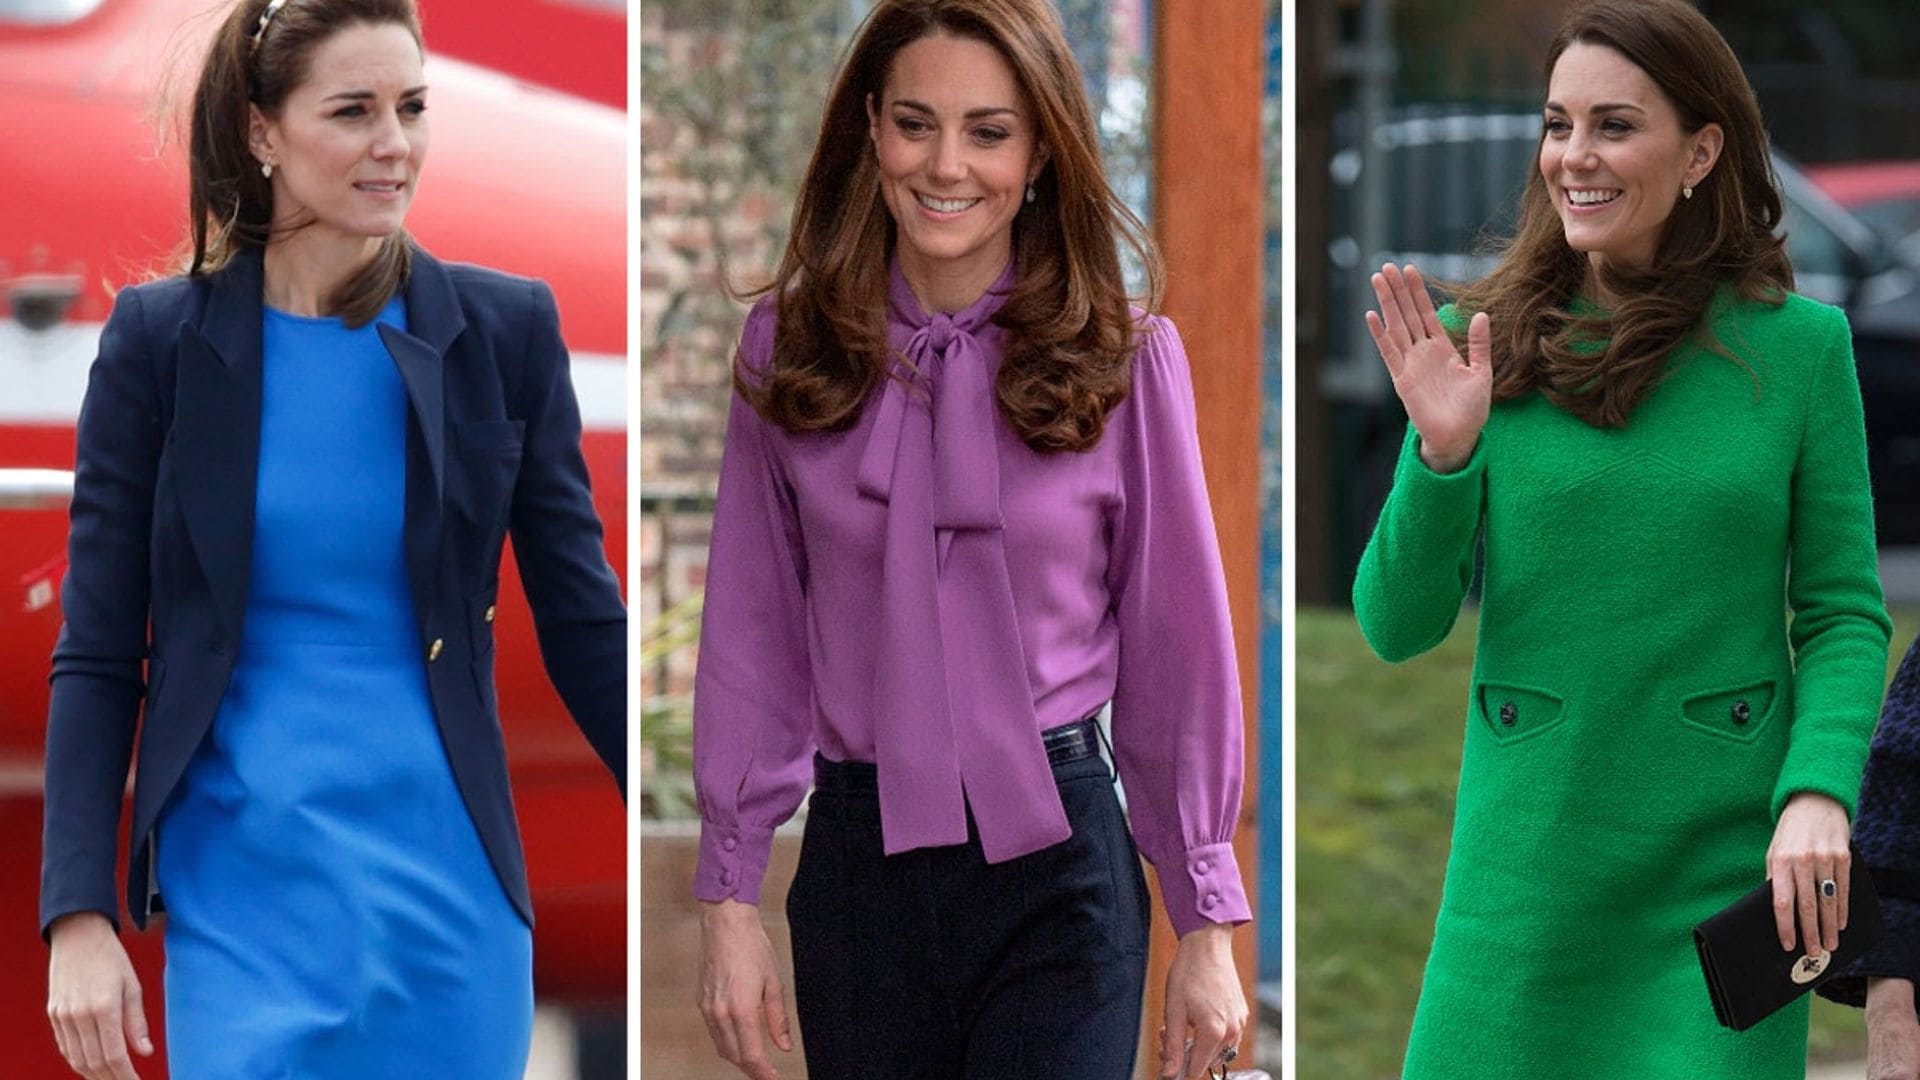 Let these chic Kate Middleton outfits inspire you to spruce up what you're wearing to work